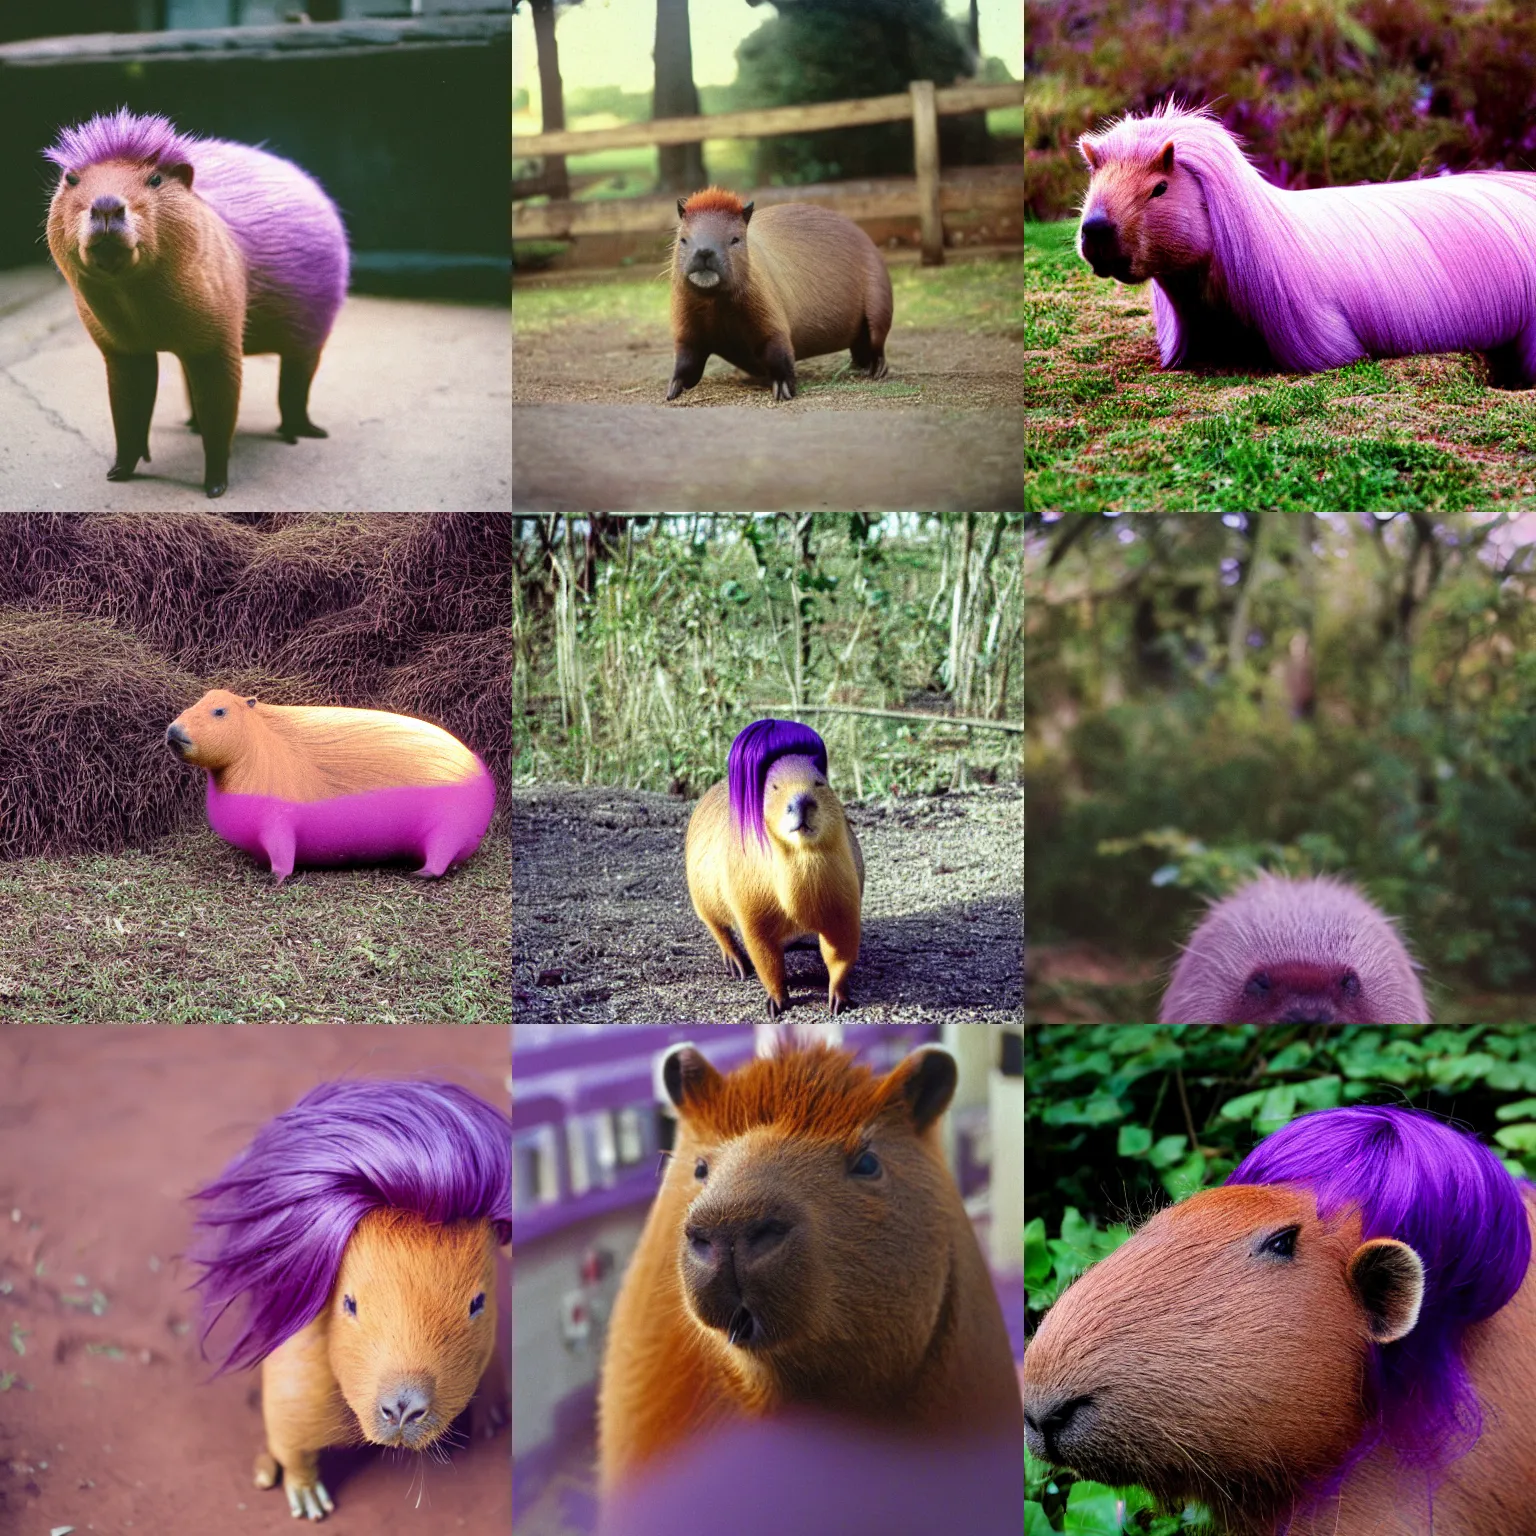 Prompt: 3 5 mm film photo of capybara with a purple wig